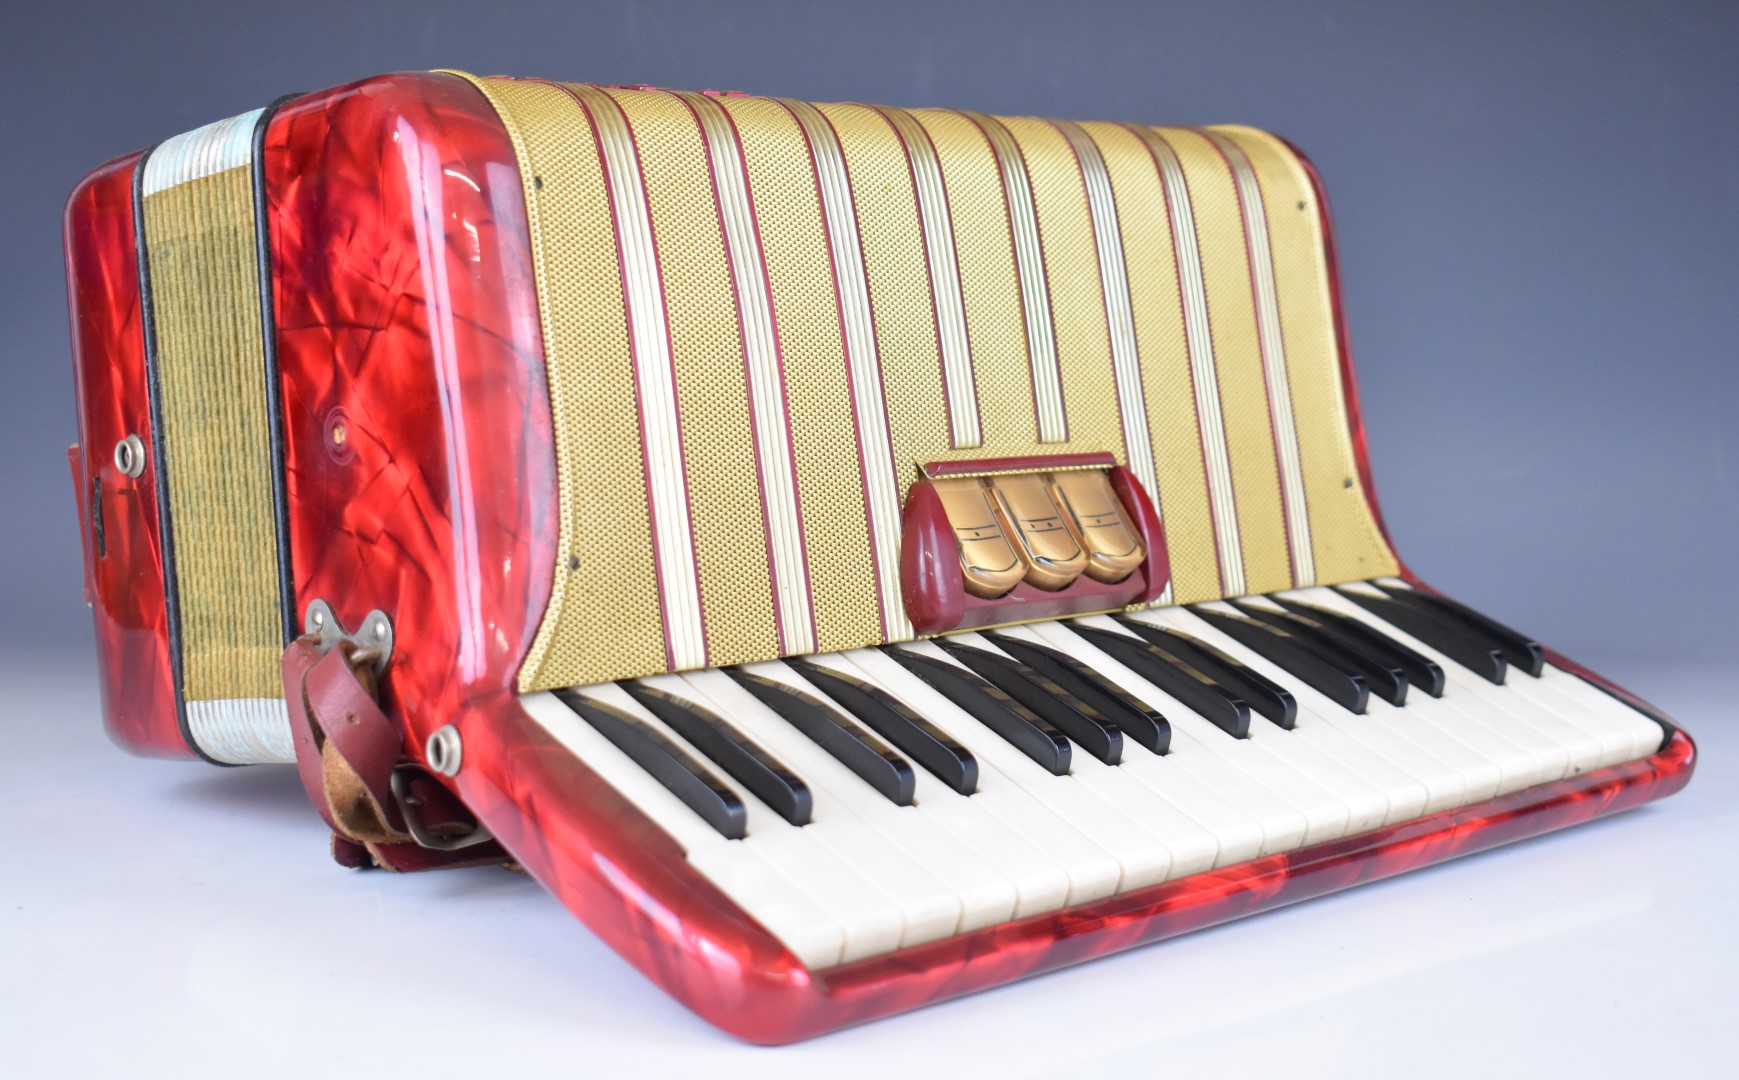 Hohner Arietta IM 36 key piano accordion in red and gold, with leather strap and hard carry case. - Image 4 of 9